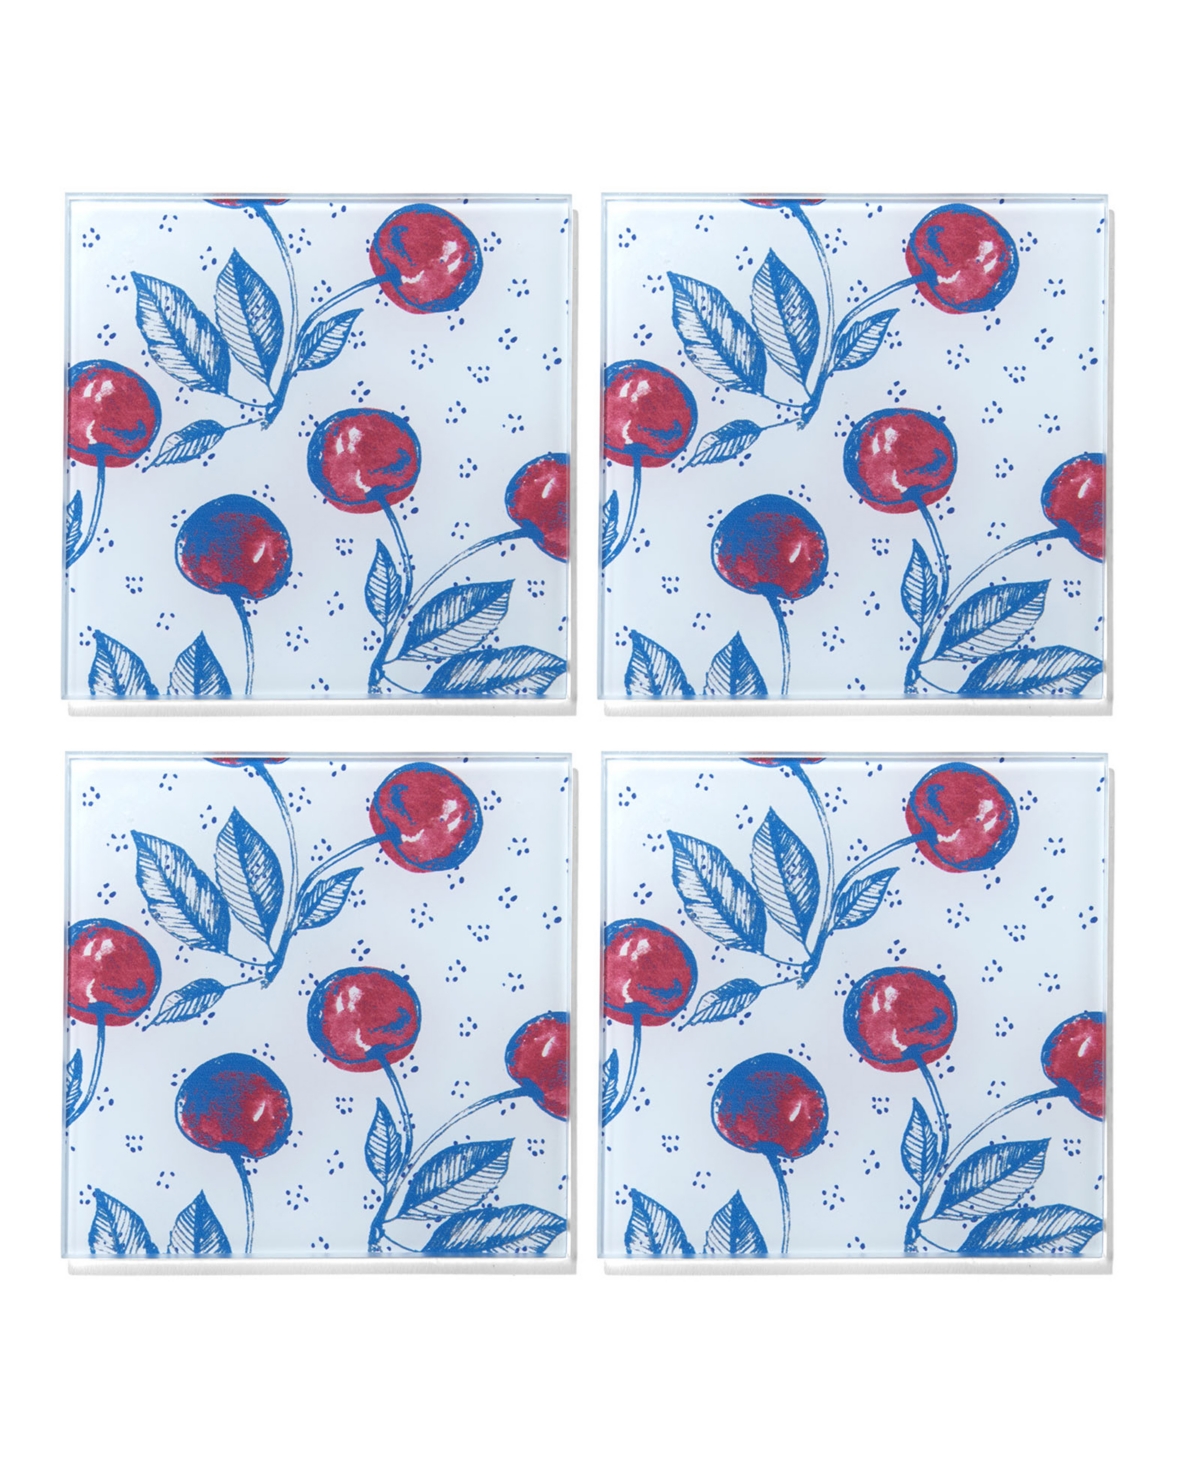 American Atelier 4 X 4" Cherry Picking Glass Coasters Set, 4 Piece In Blue